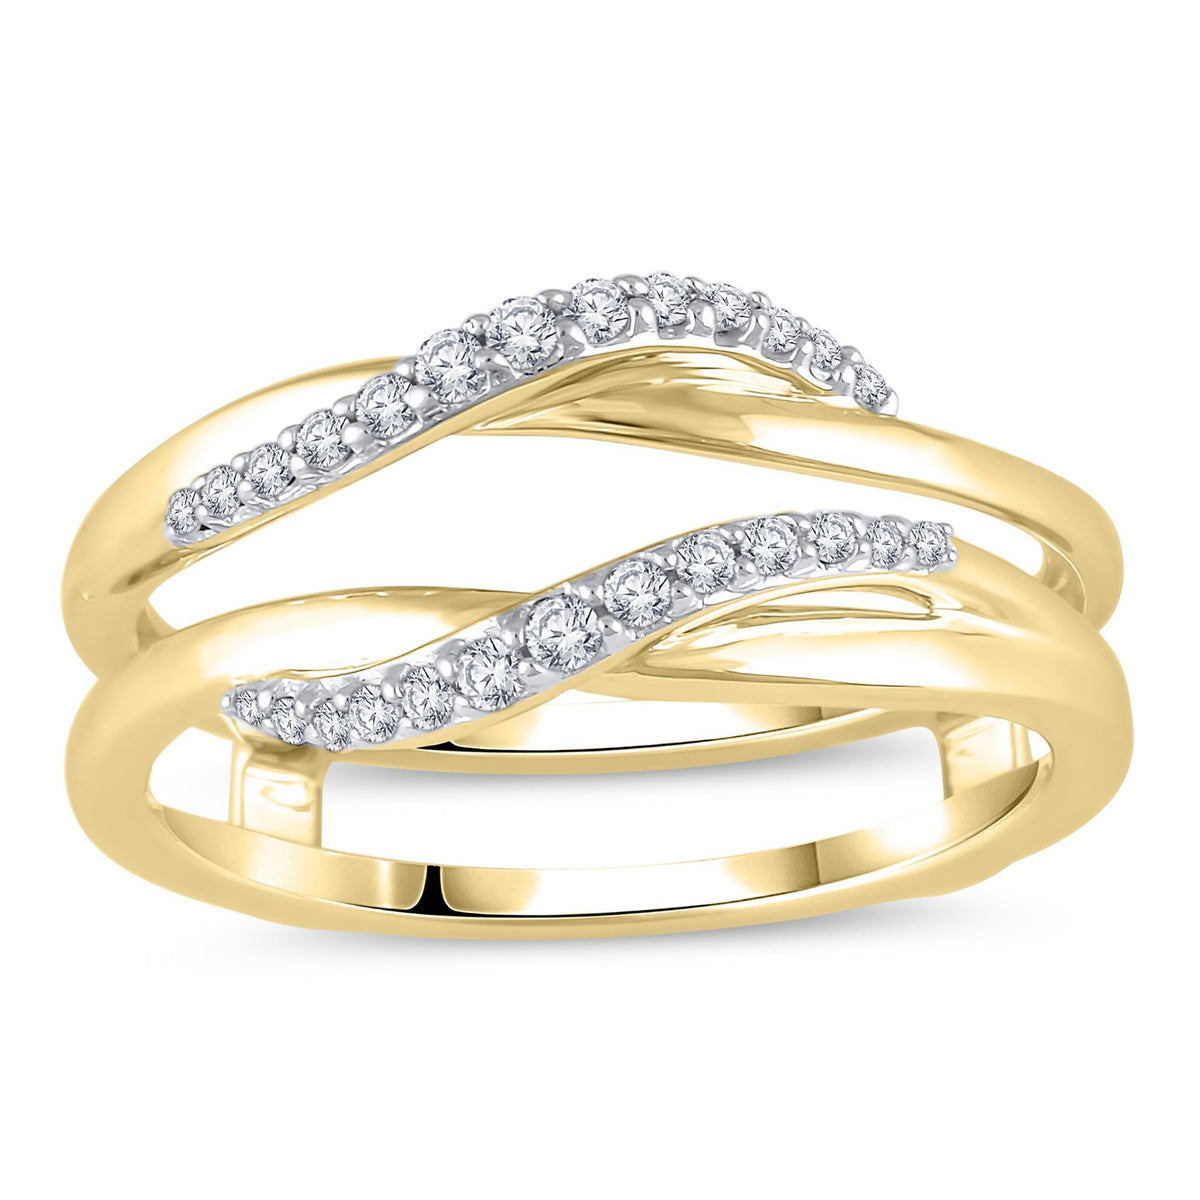 14Kt Yellow Gold Guard / Wrap Ring With 0.16cttw Natural Diamonds